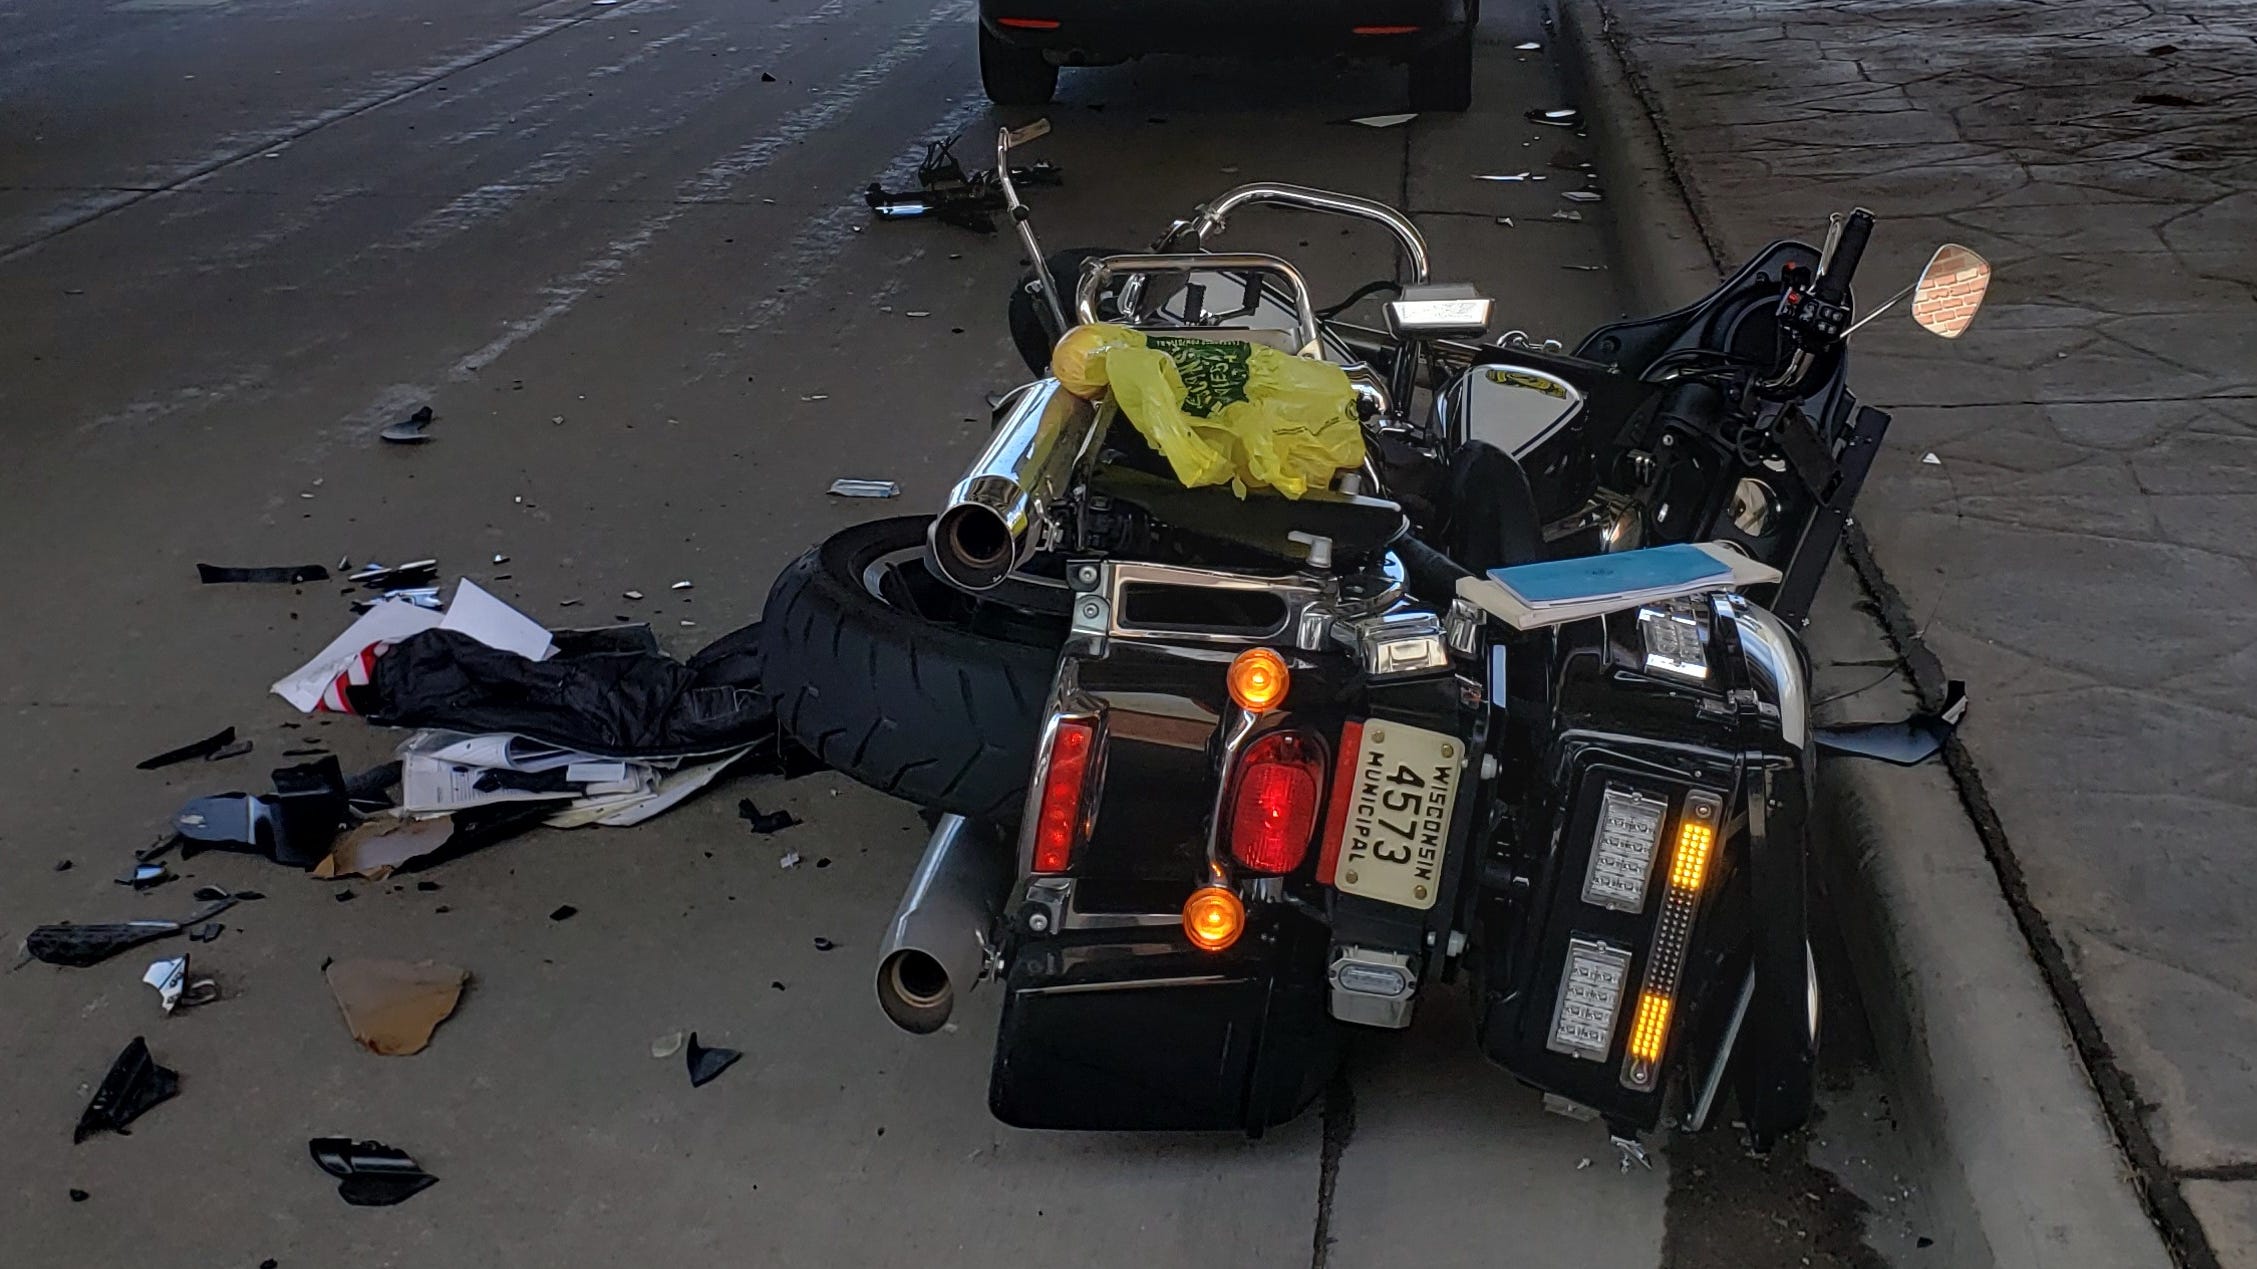  Green Bay police officer writing a ticket escapes serious injury when passing car crashes into his motorcycle 